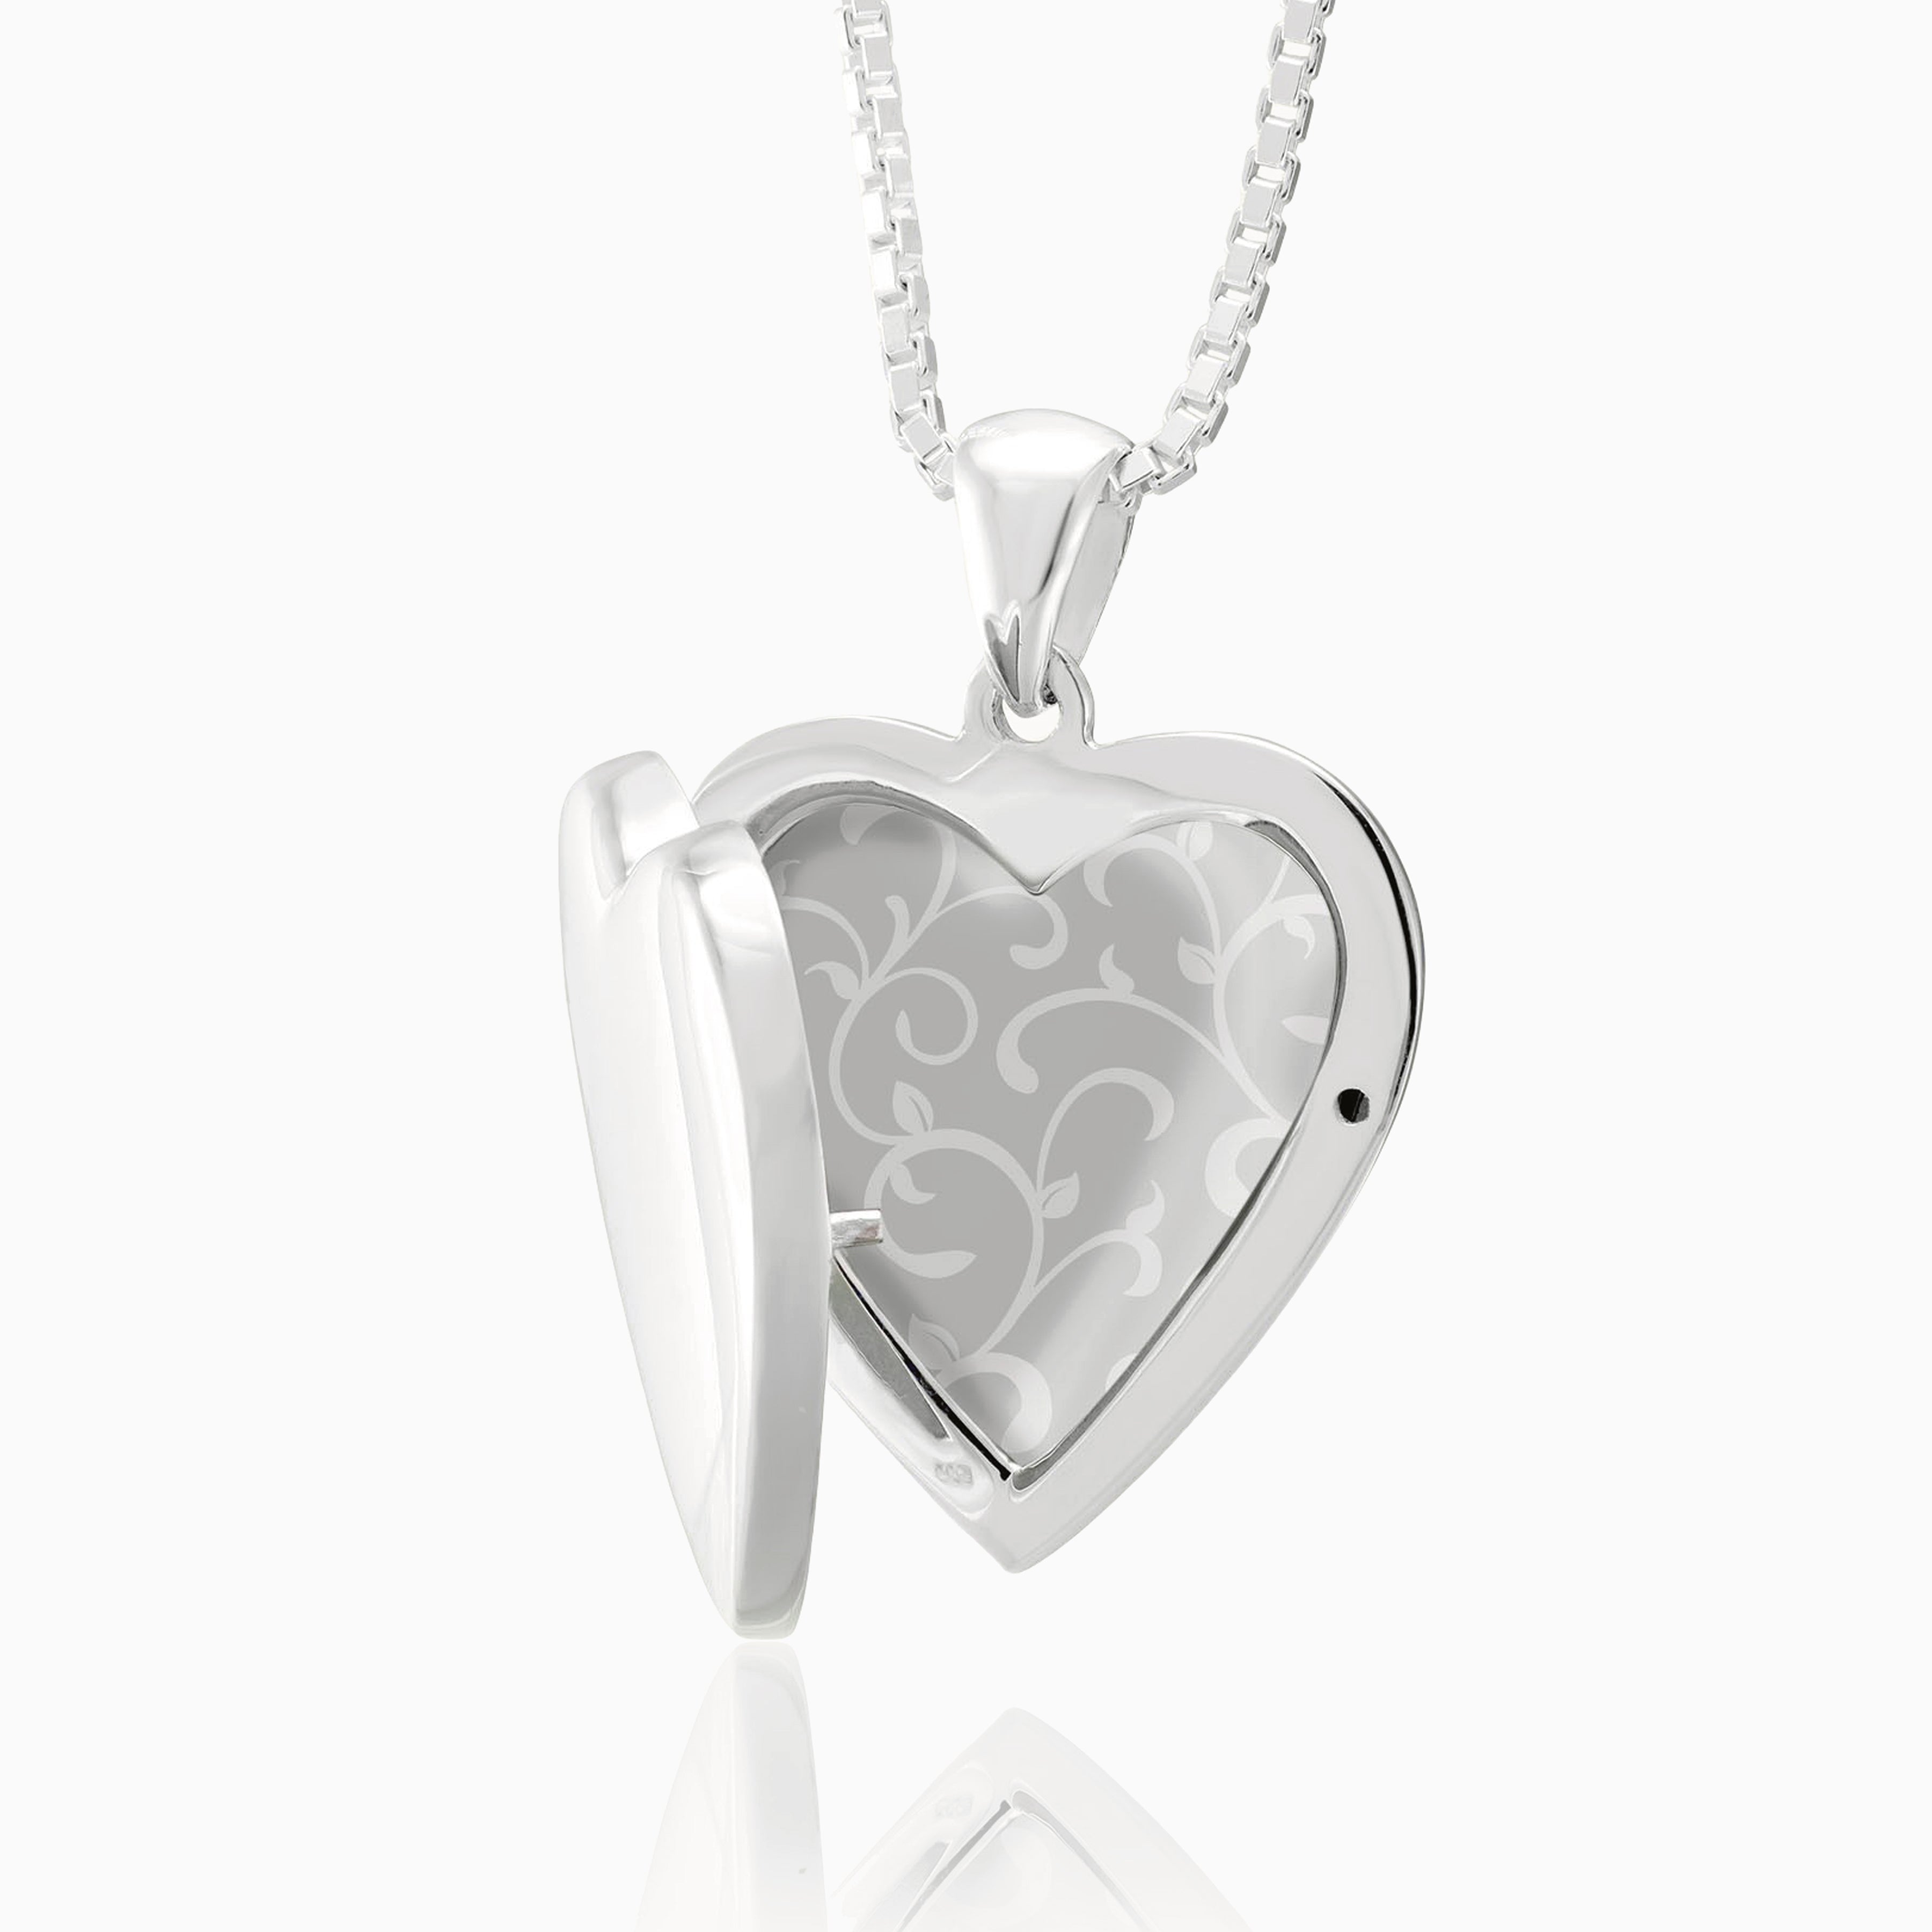 Product title: Contemporary Silver Heart Locket, product type: Locket